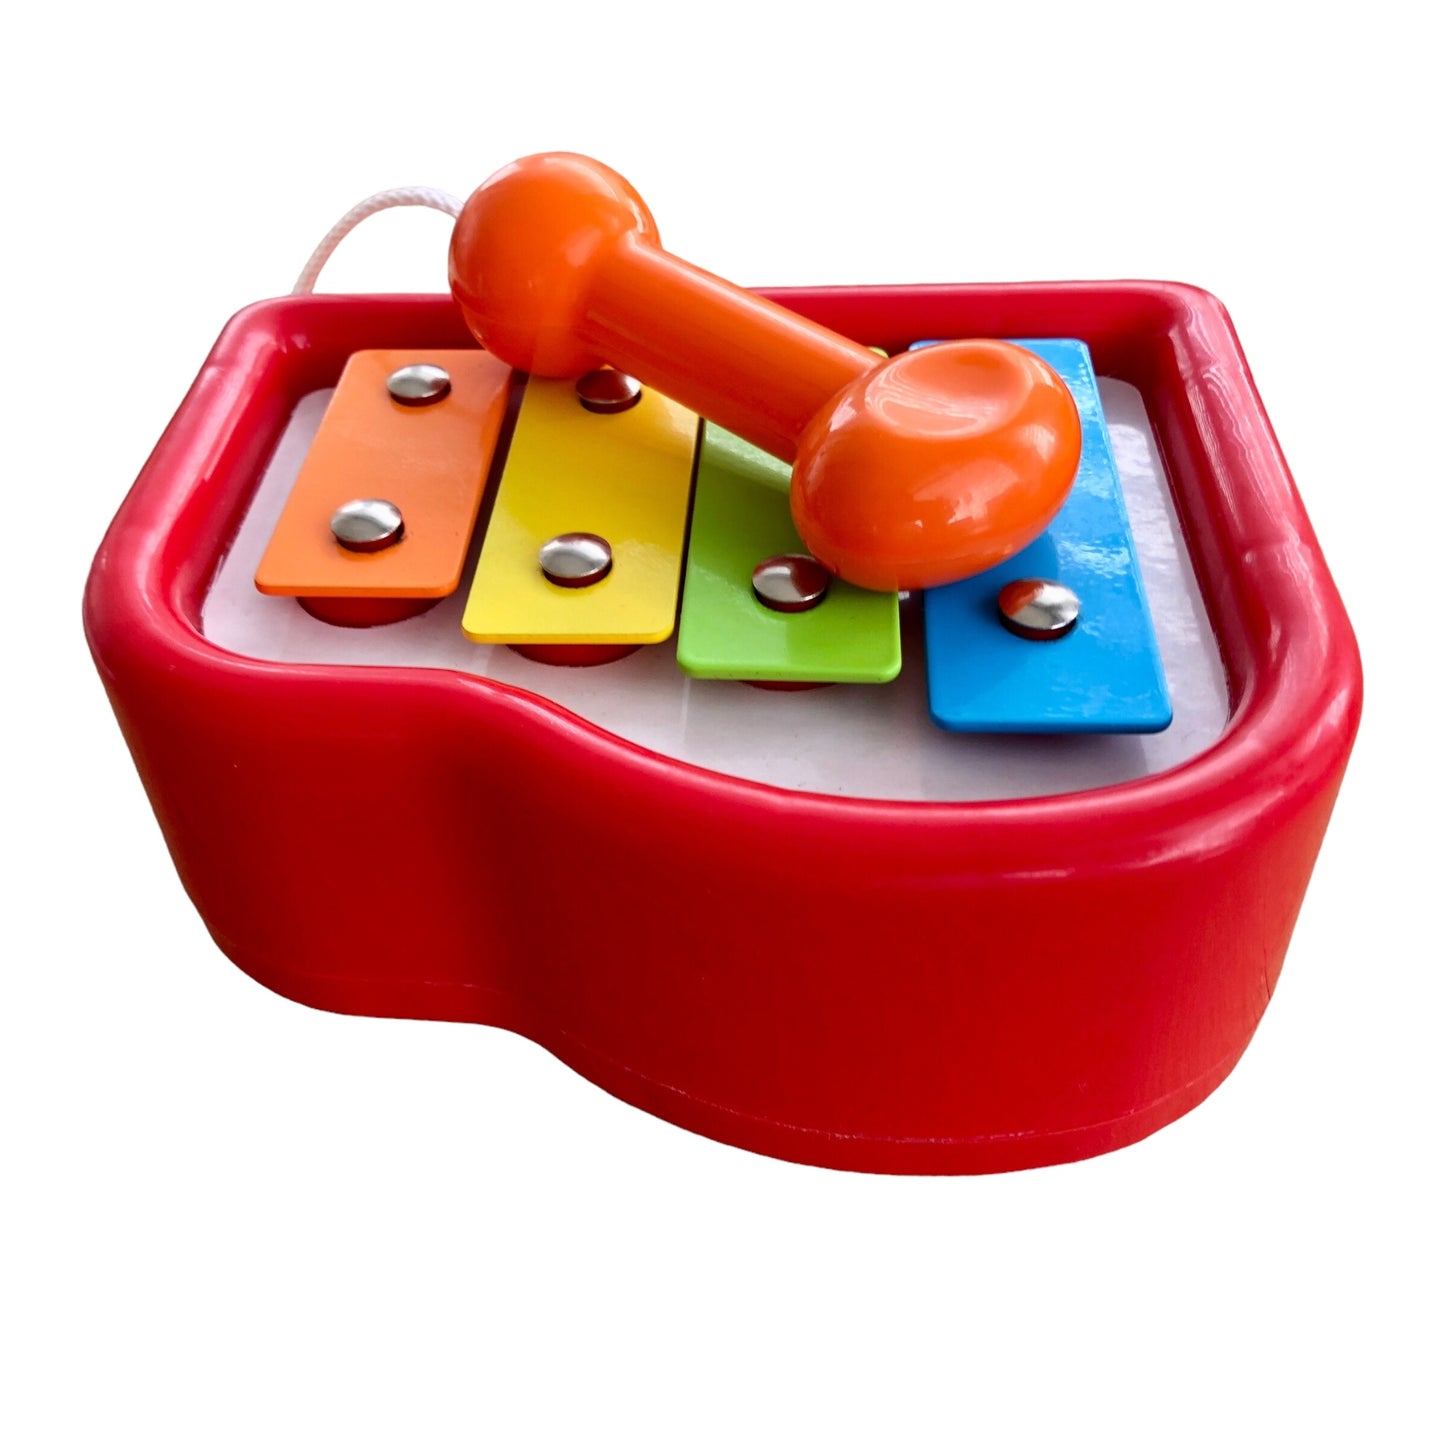 Baby toy Keyboard and Xilophone